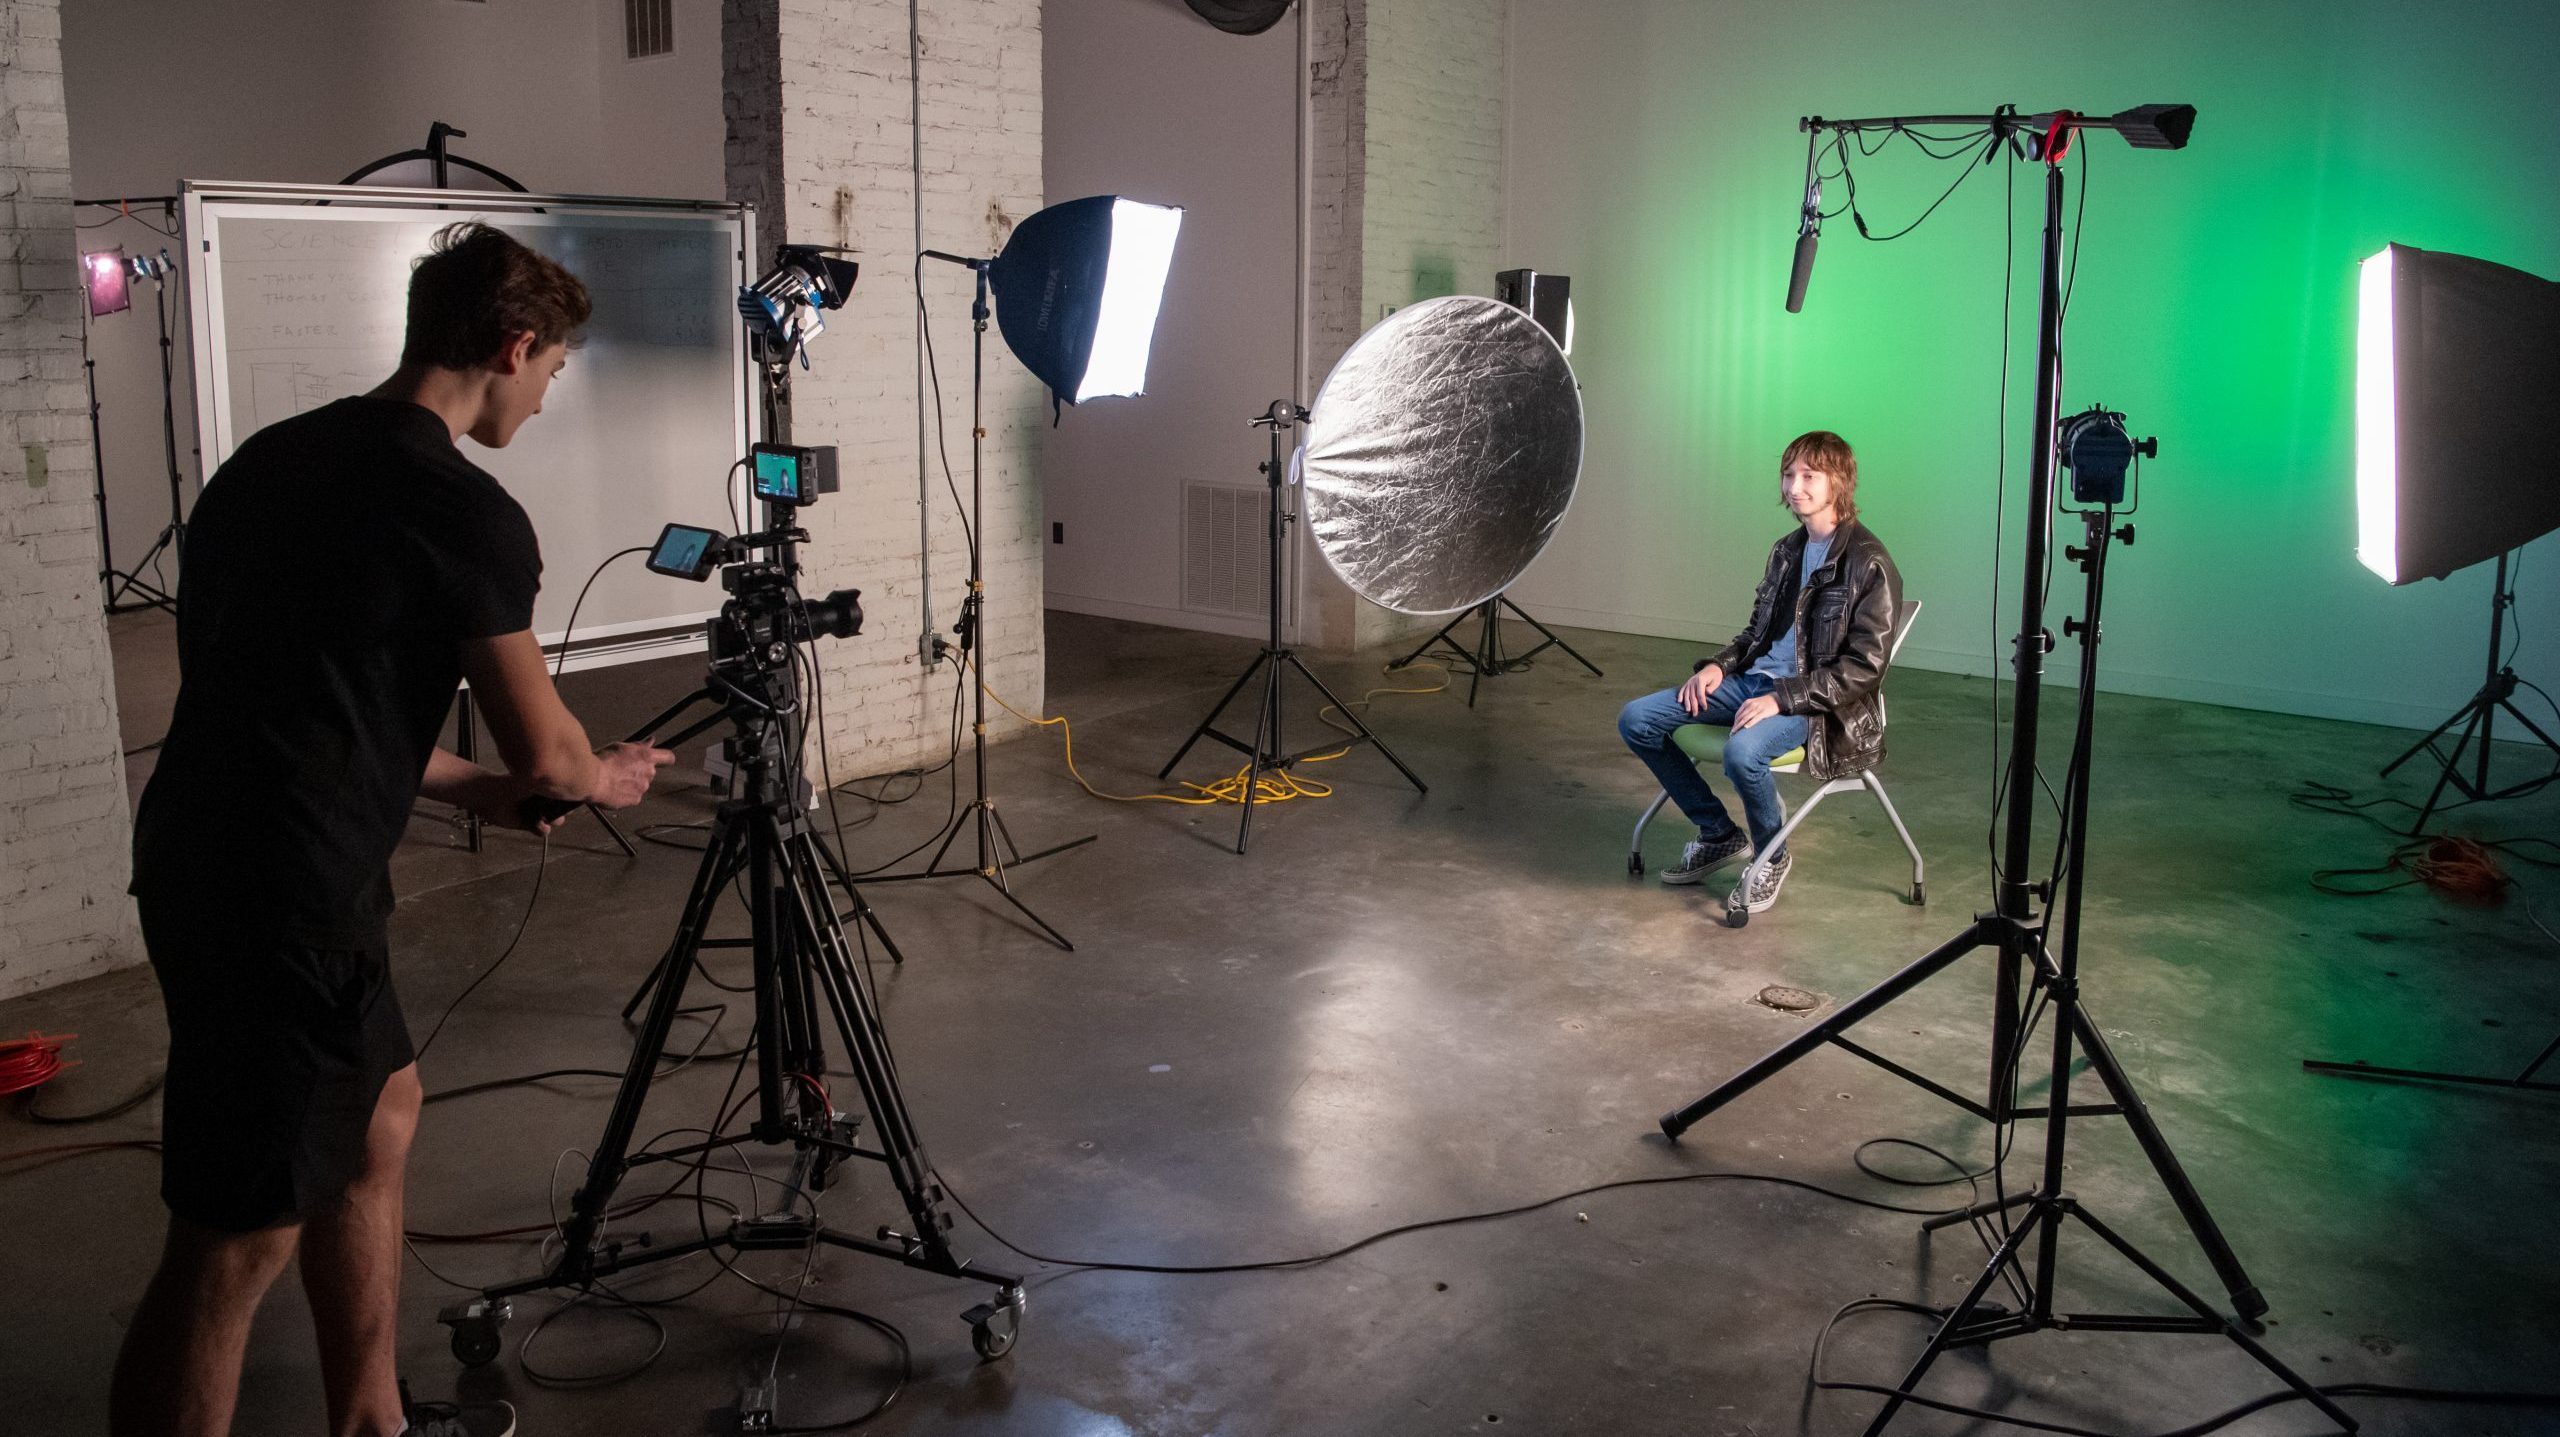 Student sitting in a chair with video equipment and lighting placed around him, while another student operates a camera on a tripod.